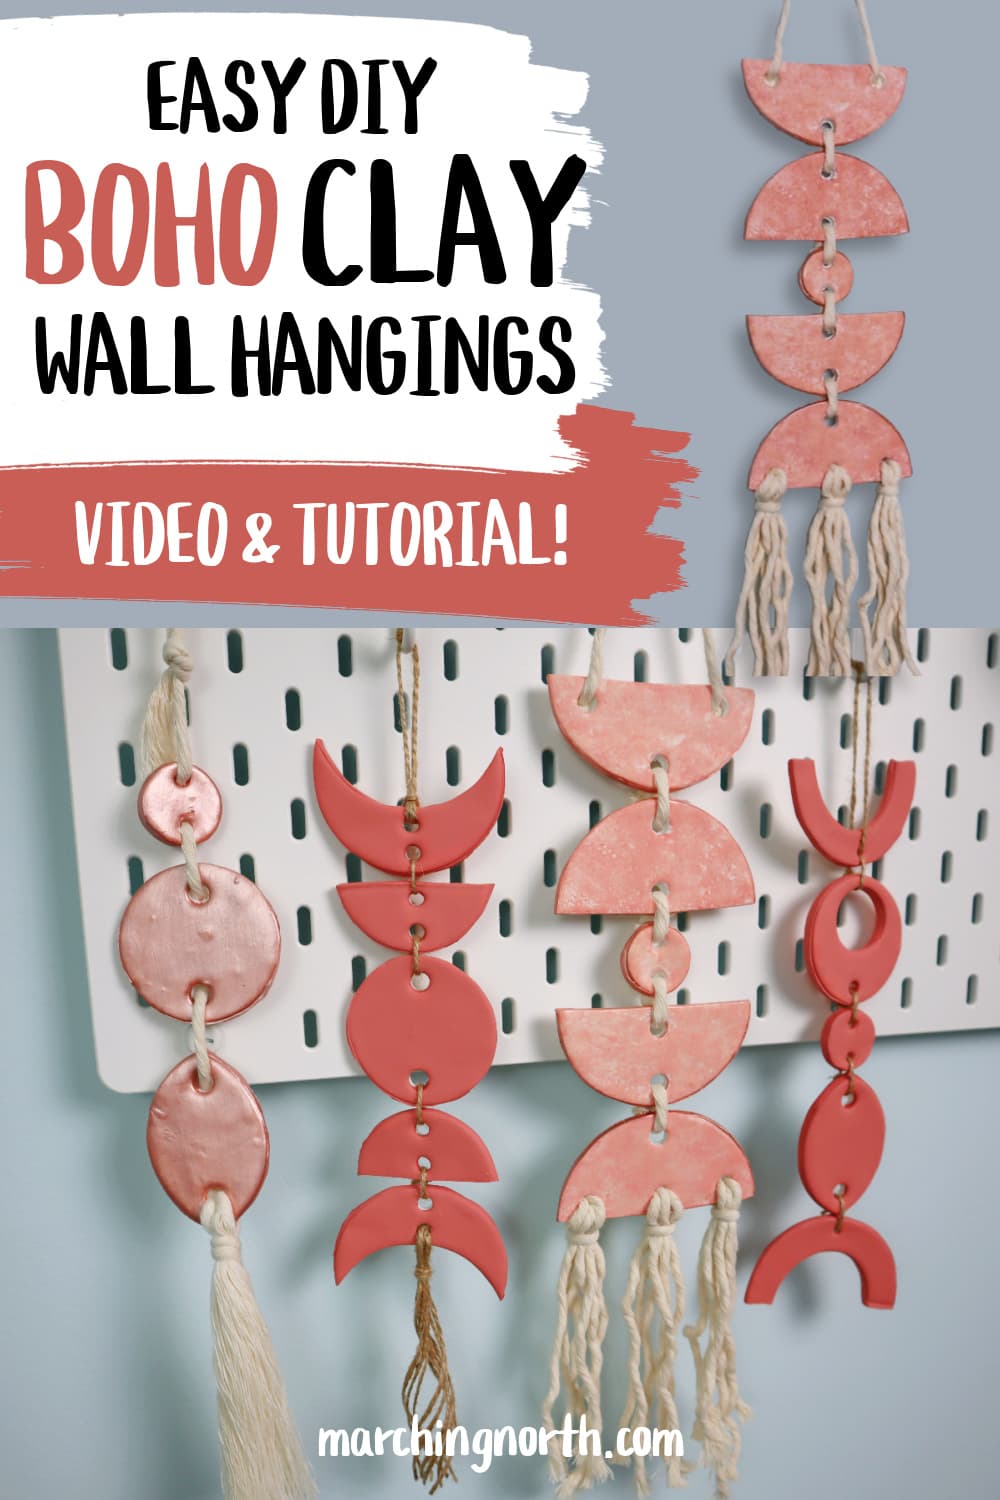 How to Use Air-dry Clay to Make Christmas Ornaments - Creative Fabrica